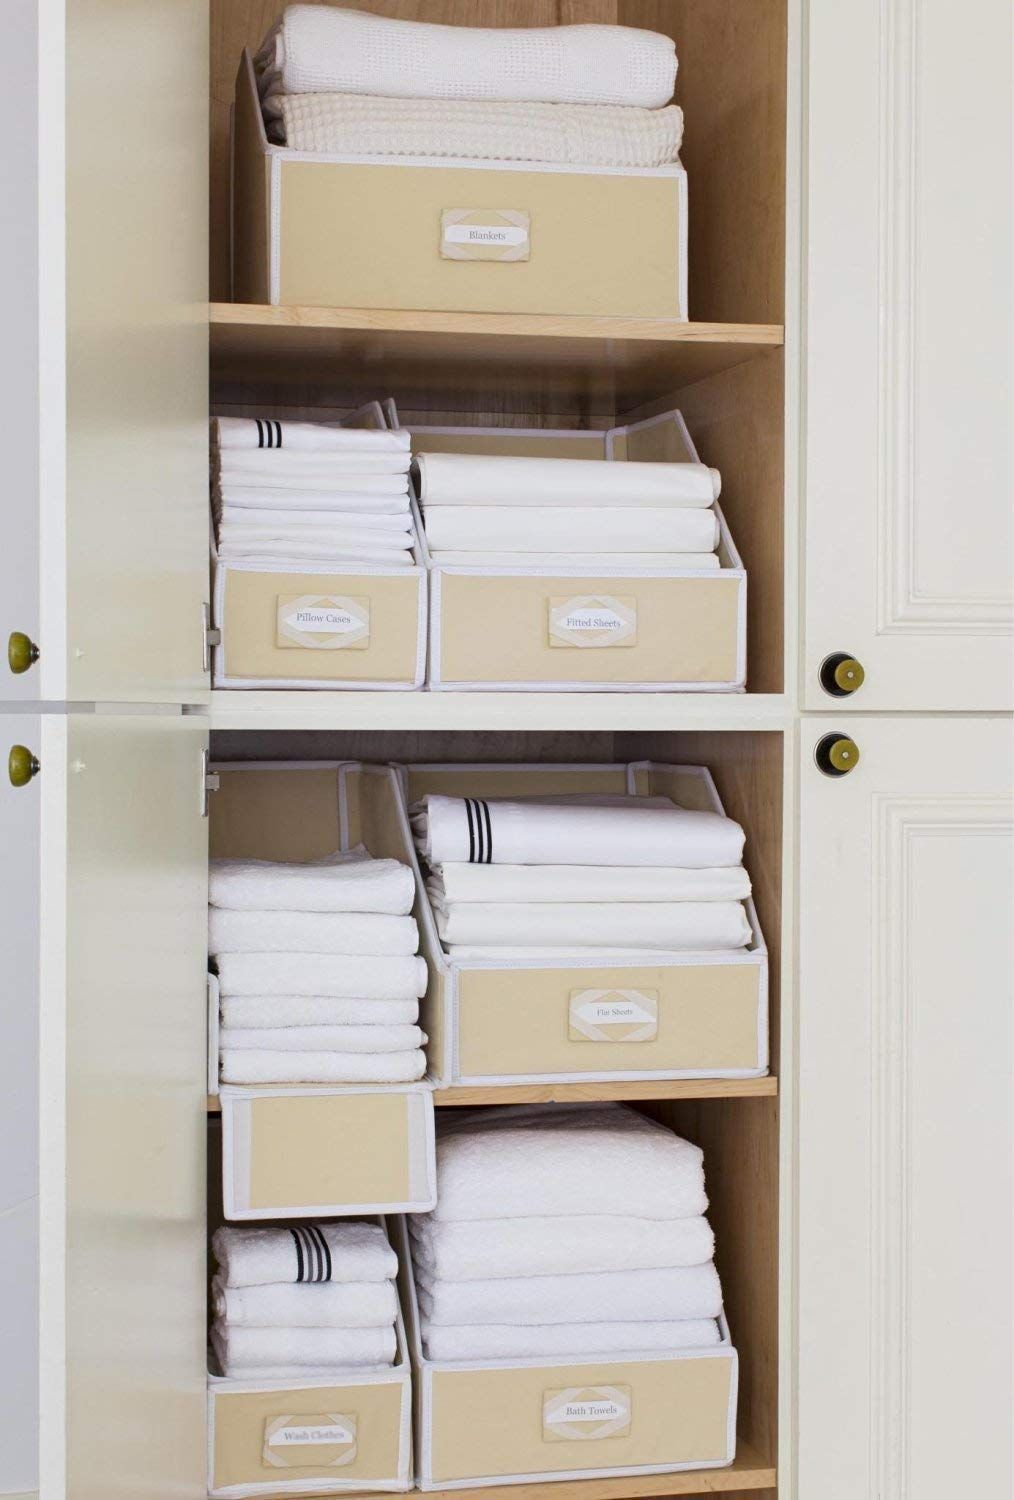 15 Creative Closet Organizing Storage For Your Home Walk In intended for size 1014 X 1500